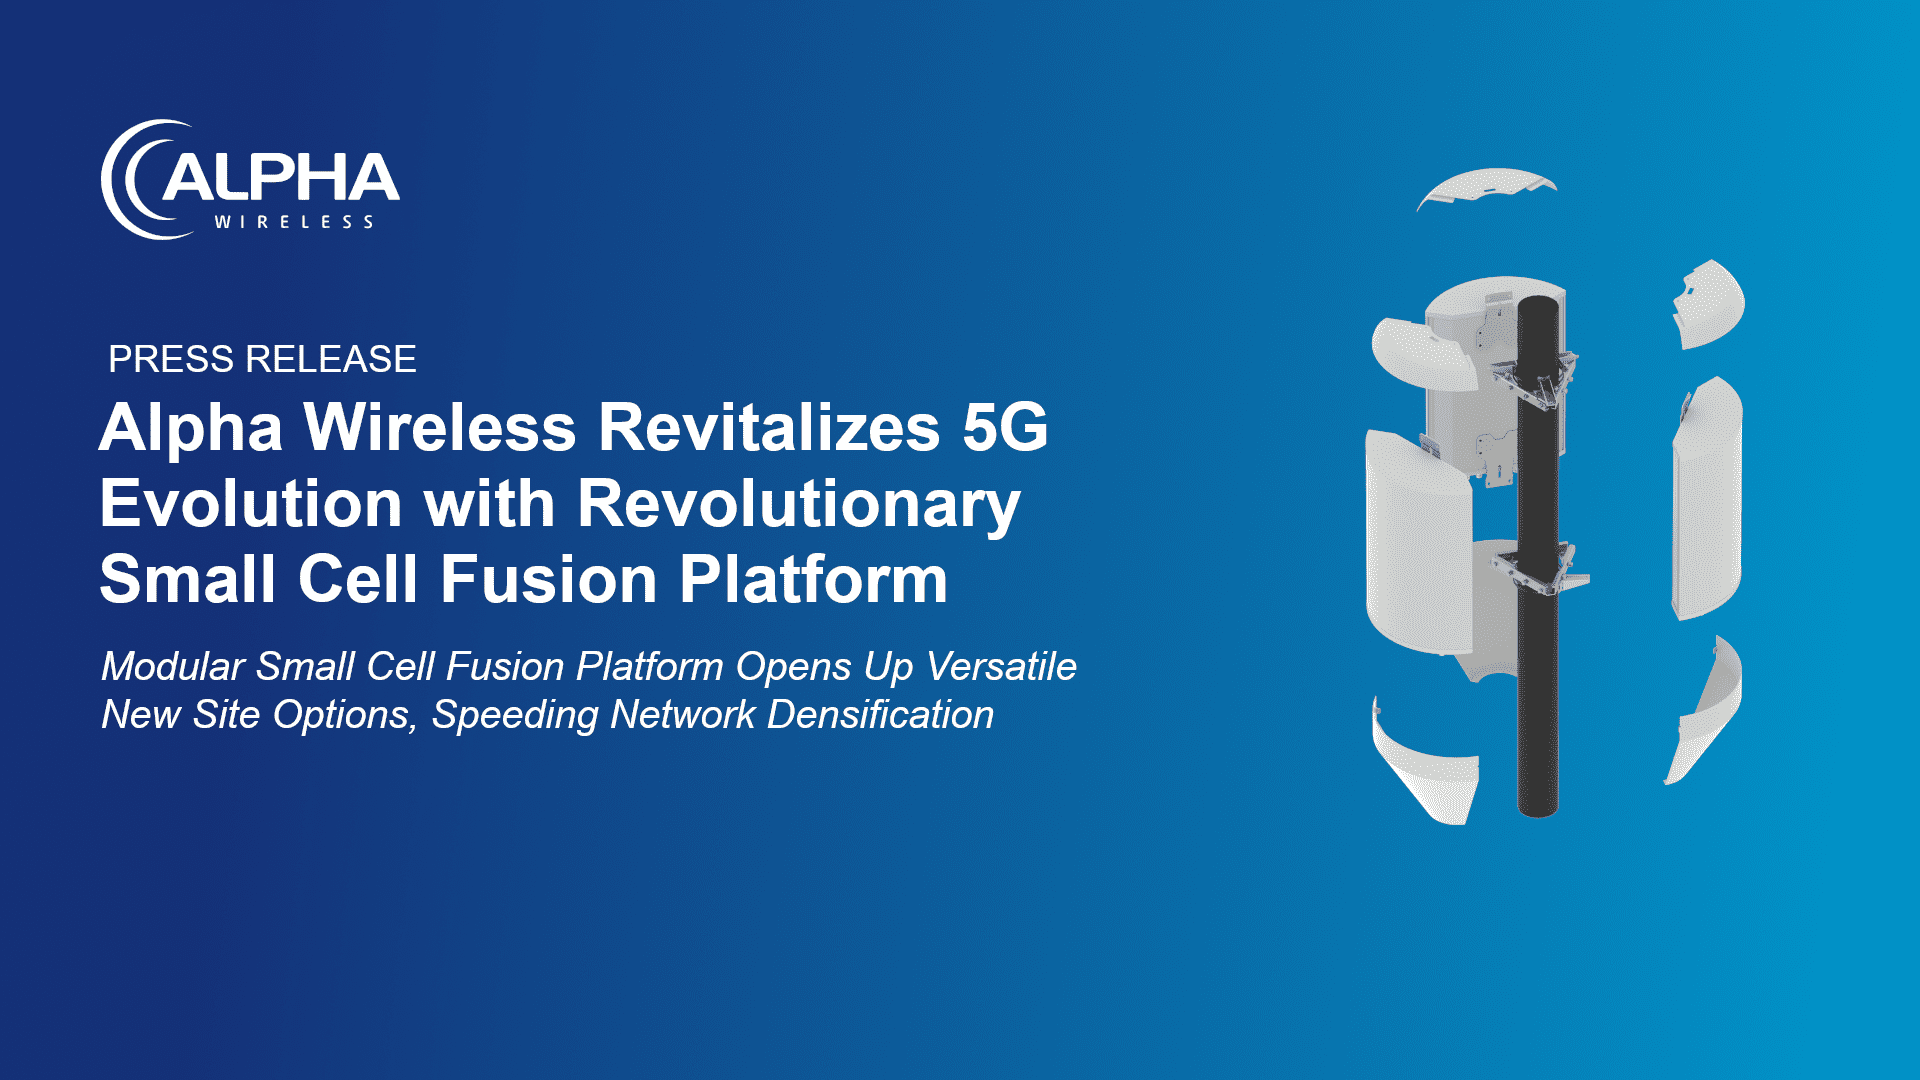 Alpha Wireless Revitalizes 5G Evolution with Revolutionary Small Cell Fusion Platform